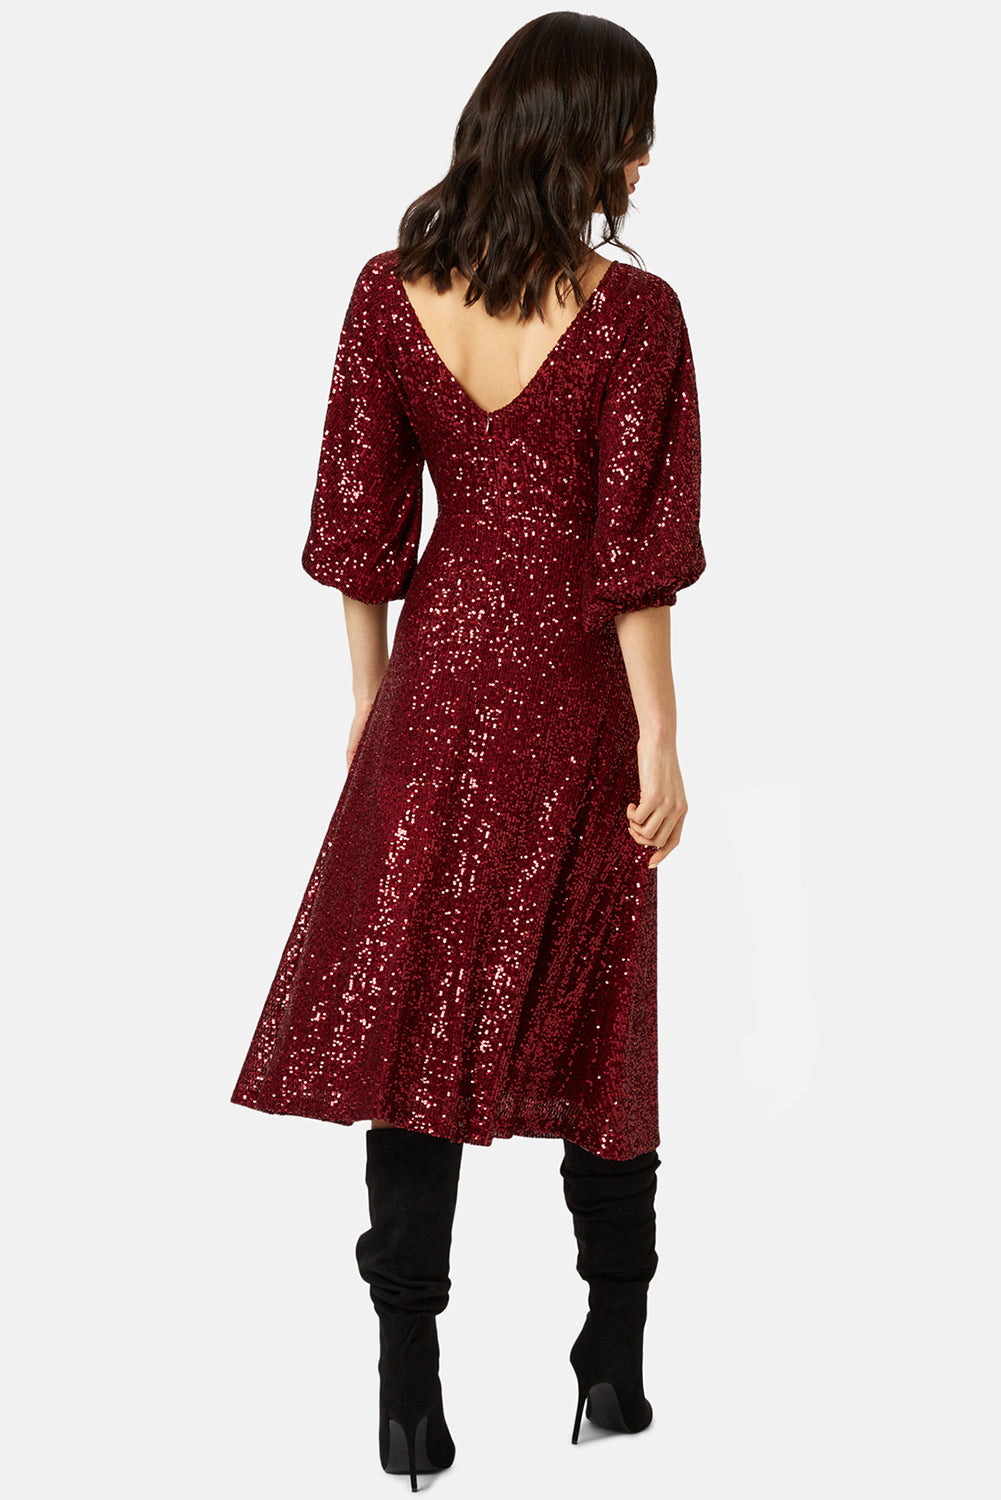 Traffic People Dress EXILE Sequin Wine - Sub Couture